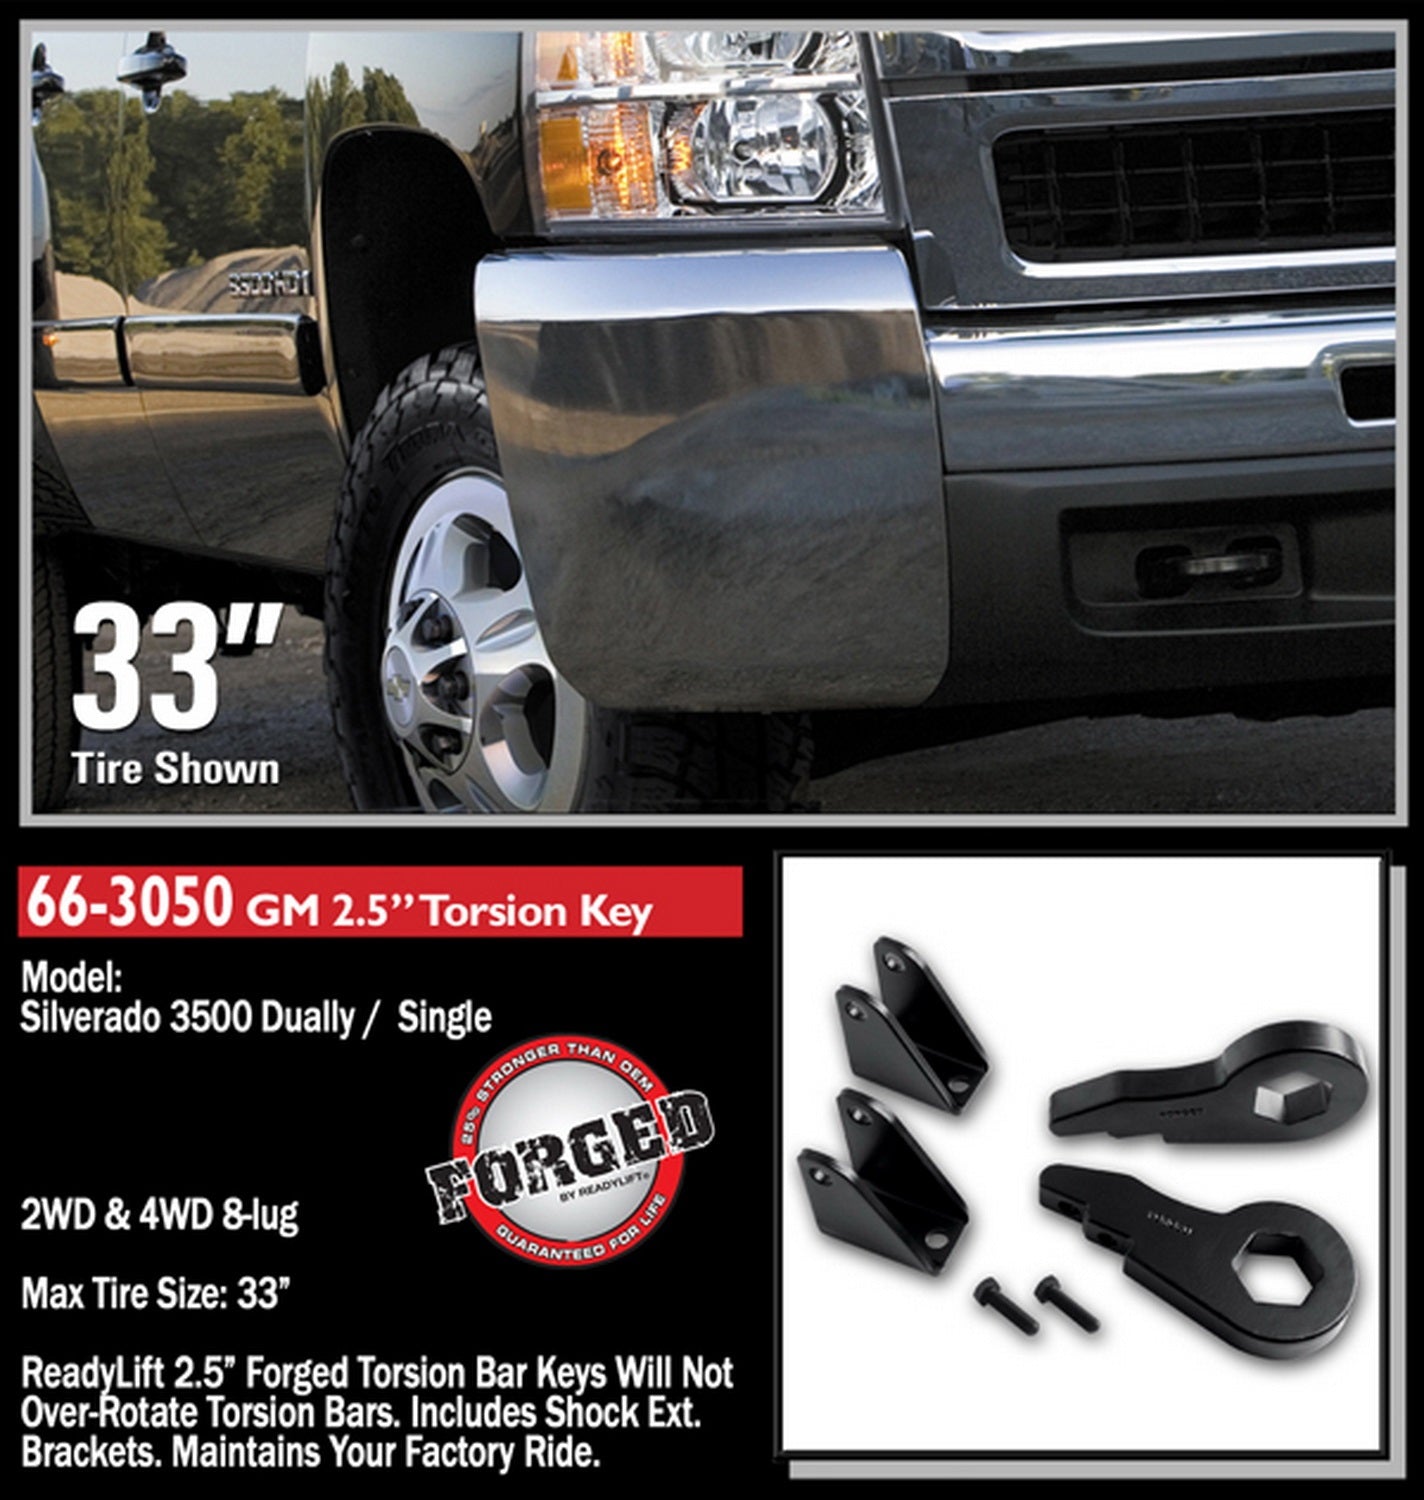 Readylift 66-3050 2.5" Front Leveling Kit W/ Forged Torsion Key - GM Full-Size Truck SUV 2000-2012, Black, For Tires Up to 33"